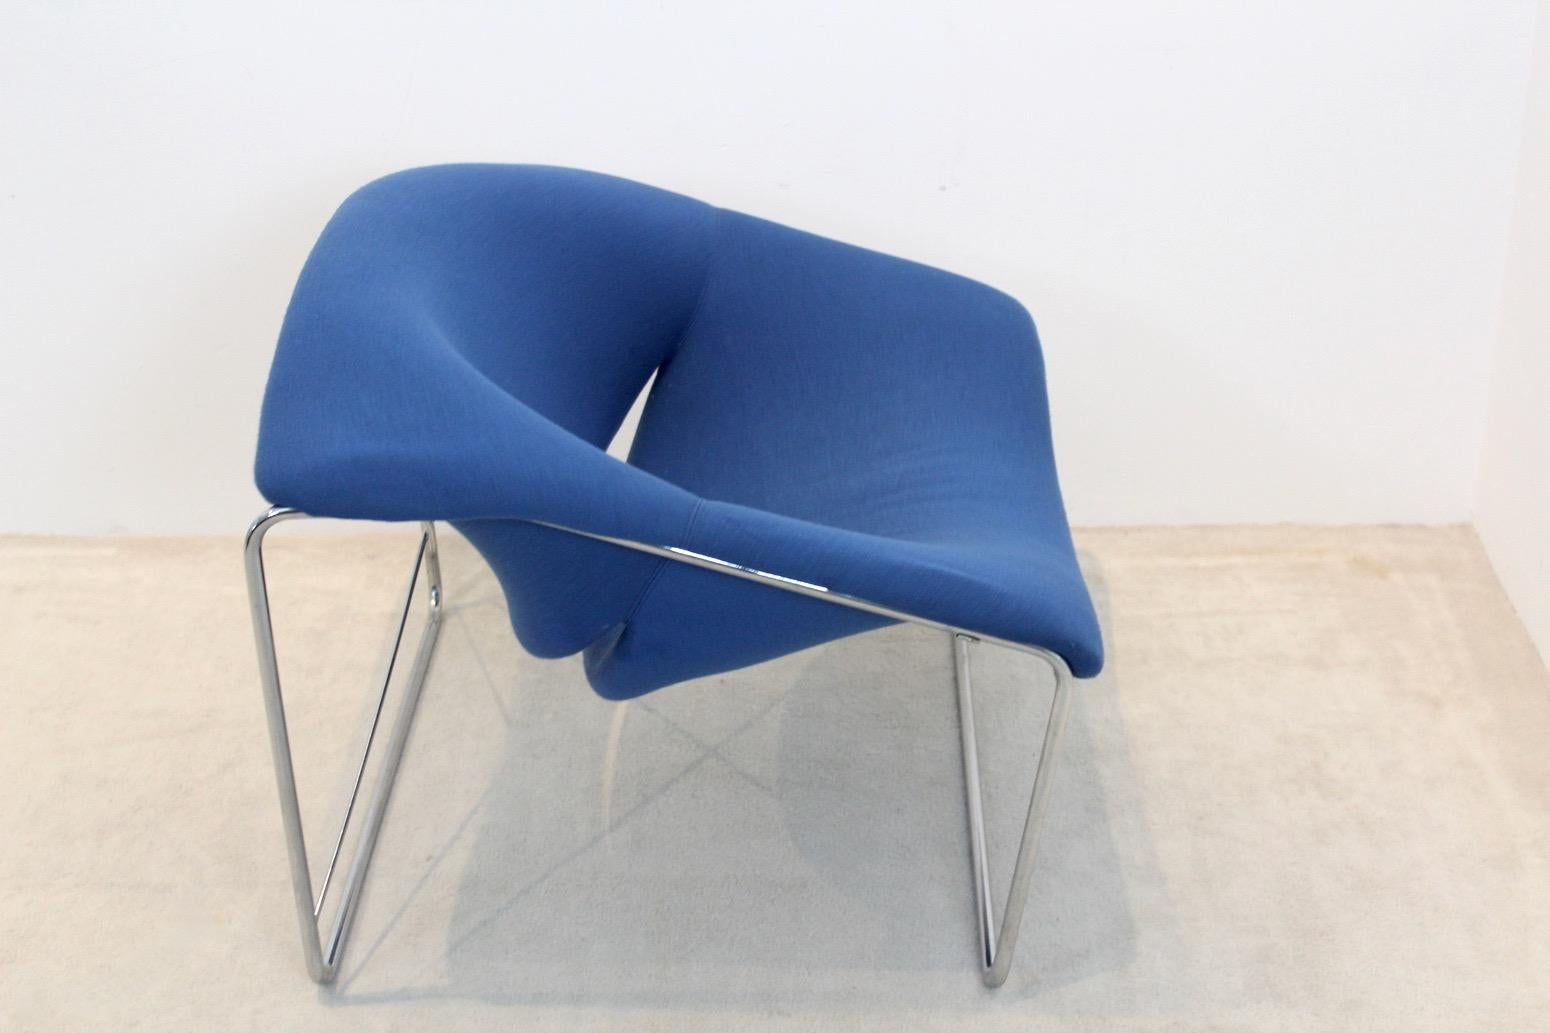 Steel Iconic 'Cubique' Chair by Olivier Mourgue for Airborne International, 1968 For Sale